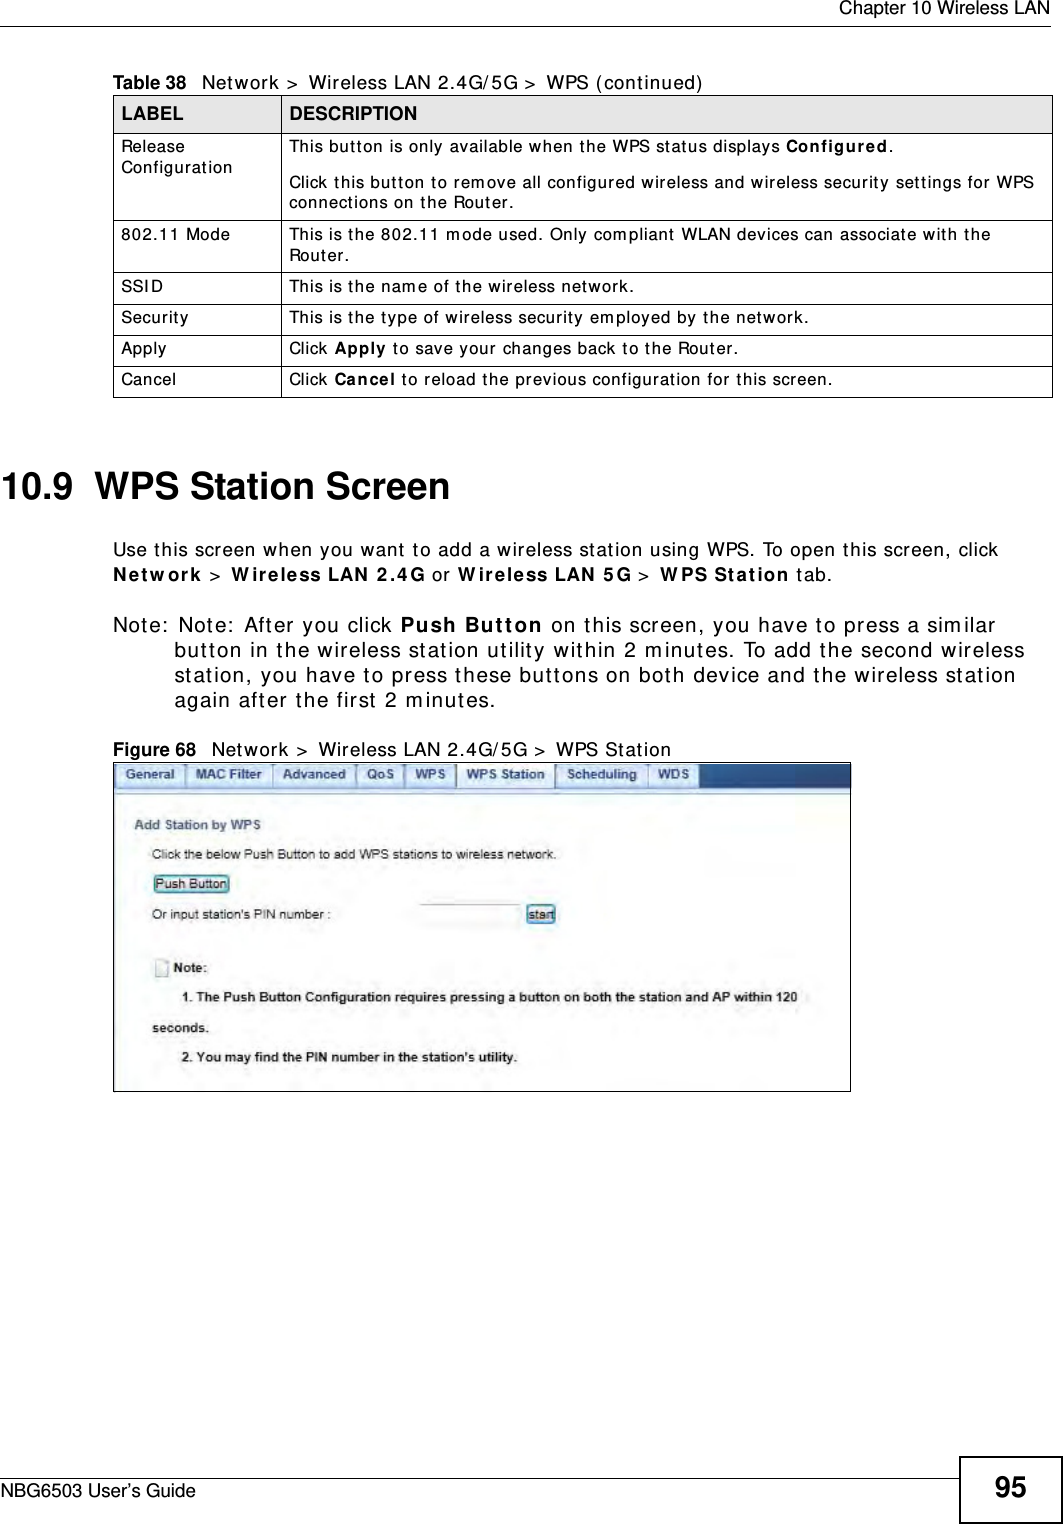  Chapter 10 Wireless LANNBG6503 User’s Guide 9510.9  WPS Station ScreenUse this screen when you want to add a wireless station using WPS. To open this screen, click Network &gt; Wireless LAN 2.4G or Wireless LAN 5G &gt; WPS Station tab.Note: Note: After you click Push Button on this screen, you have to press a similar button in the wireless station utility within 2 minutes. To add the second wireless station, you have to press these buttons on both device and the wireless station again after the first 2 minutes.Figure 68   Network &gt; Wireless LAN 2.4G/5G &gt; WPS StationRelease Configuration This button is only available when the WPS status displays Configured.Click this button to remove all configured wireless and wireless security settings for WPS connections on the Router.802.11 Mode This is the 802.11 mode used. Only compliant WLAN devices can associate with the Router.SSID This is the name of the wireless network.Security This is the type of wireless security employed by the network.Apply Click Apply to save your changes back to the Router.Cancel Click Cancel to reload the previous configuration for this screen.Table 38   Network &gt; Wireless LAN 2.4G/5G &gt; WPS (continued)LABEL DESCRIPTION